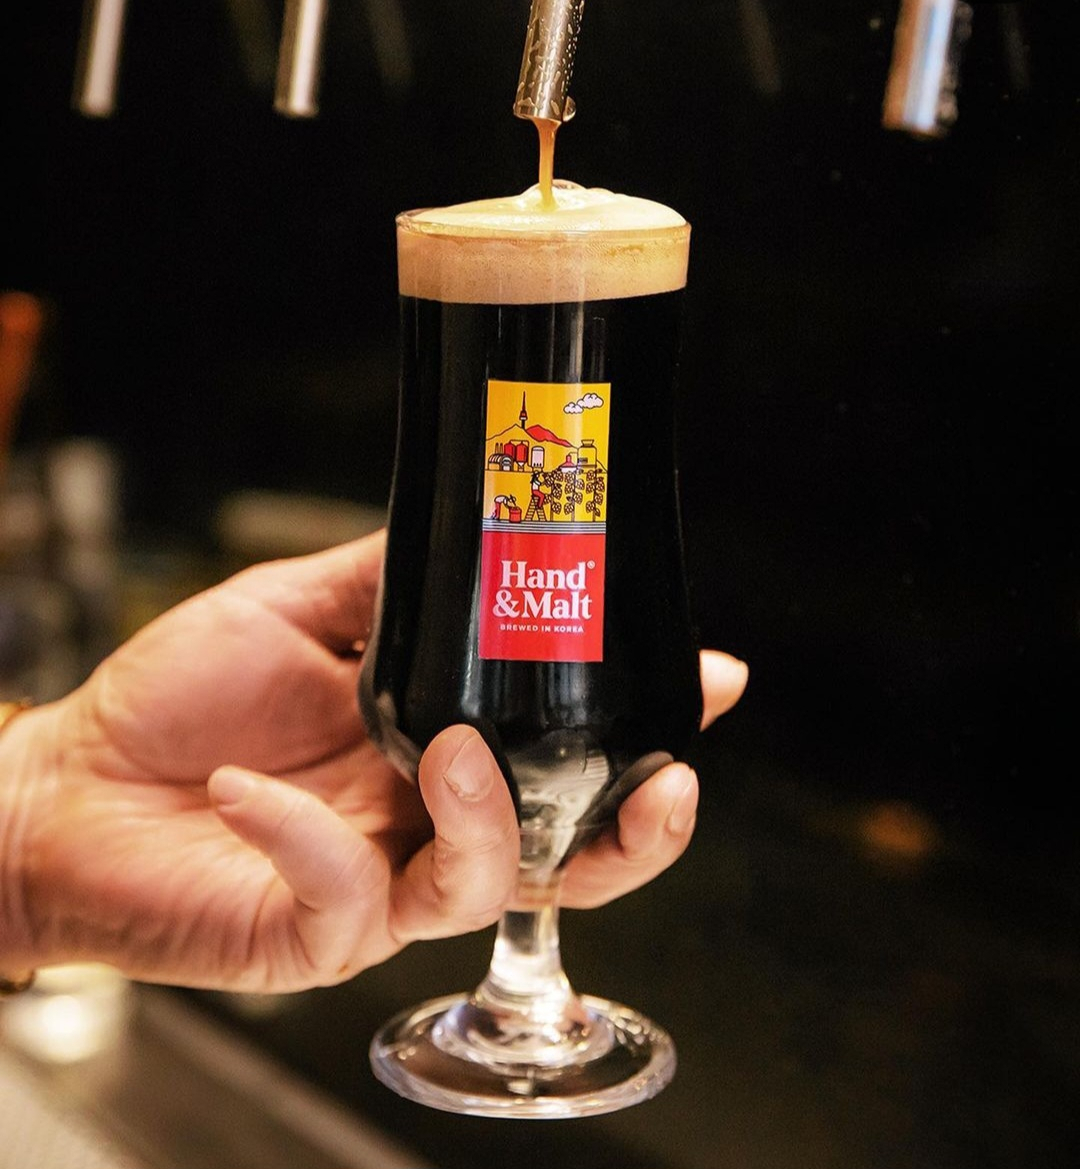 Stout beer is served at the Hand and Malt Brew Lab. (The Hand and Malt Brewing Co.)